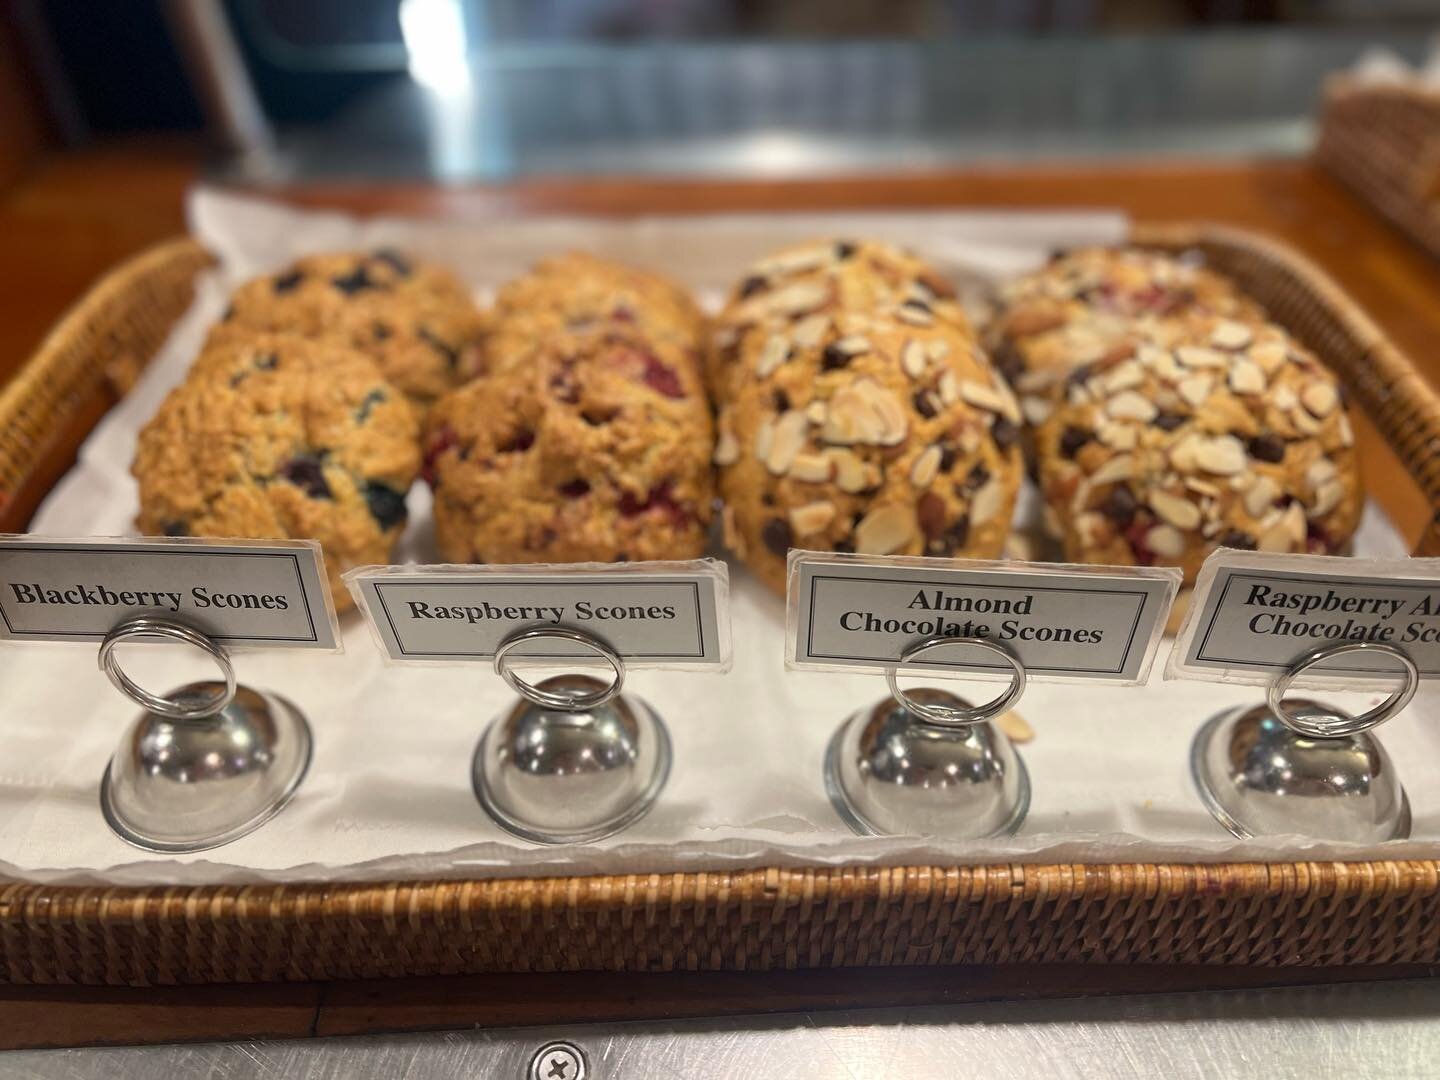 Did you know we bake all our scones from scratch? Come and get &lsquo;em before they are gone!